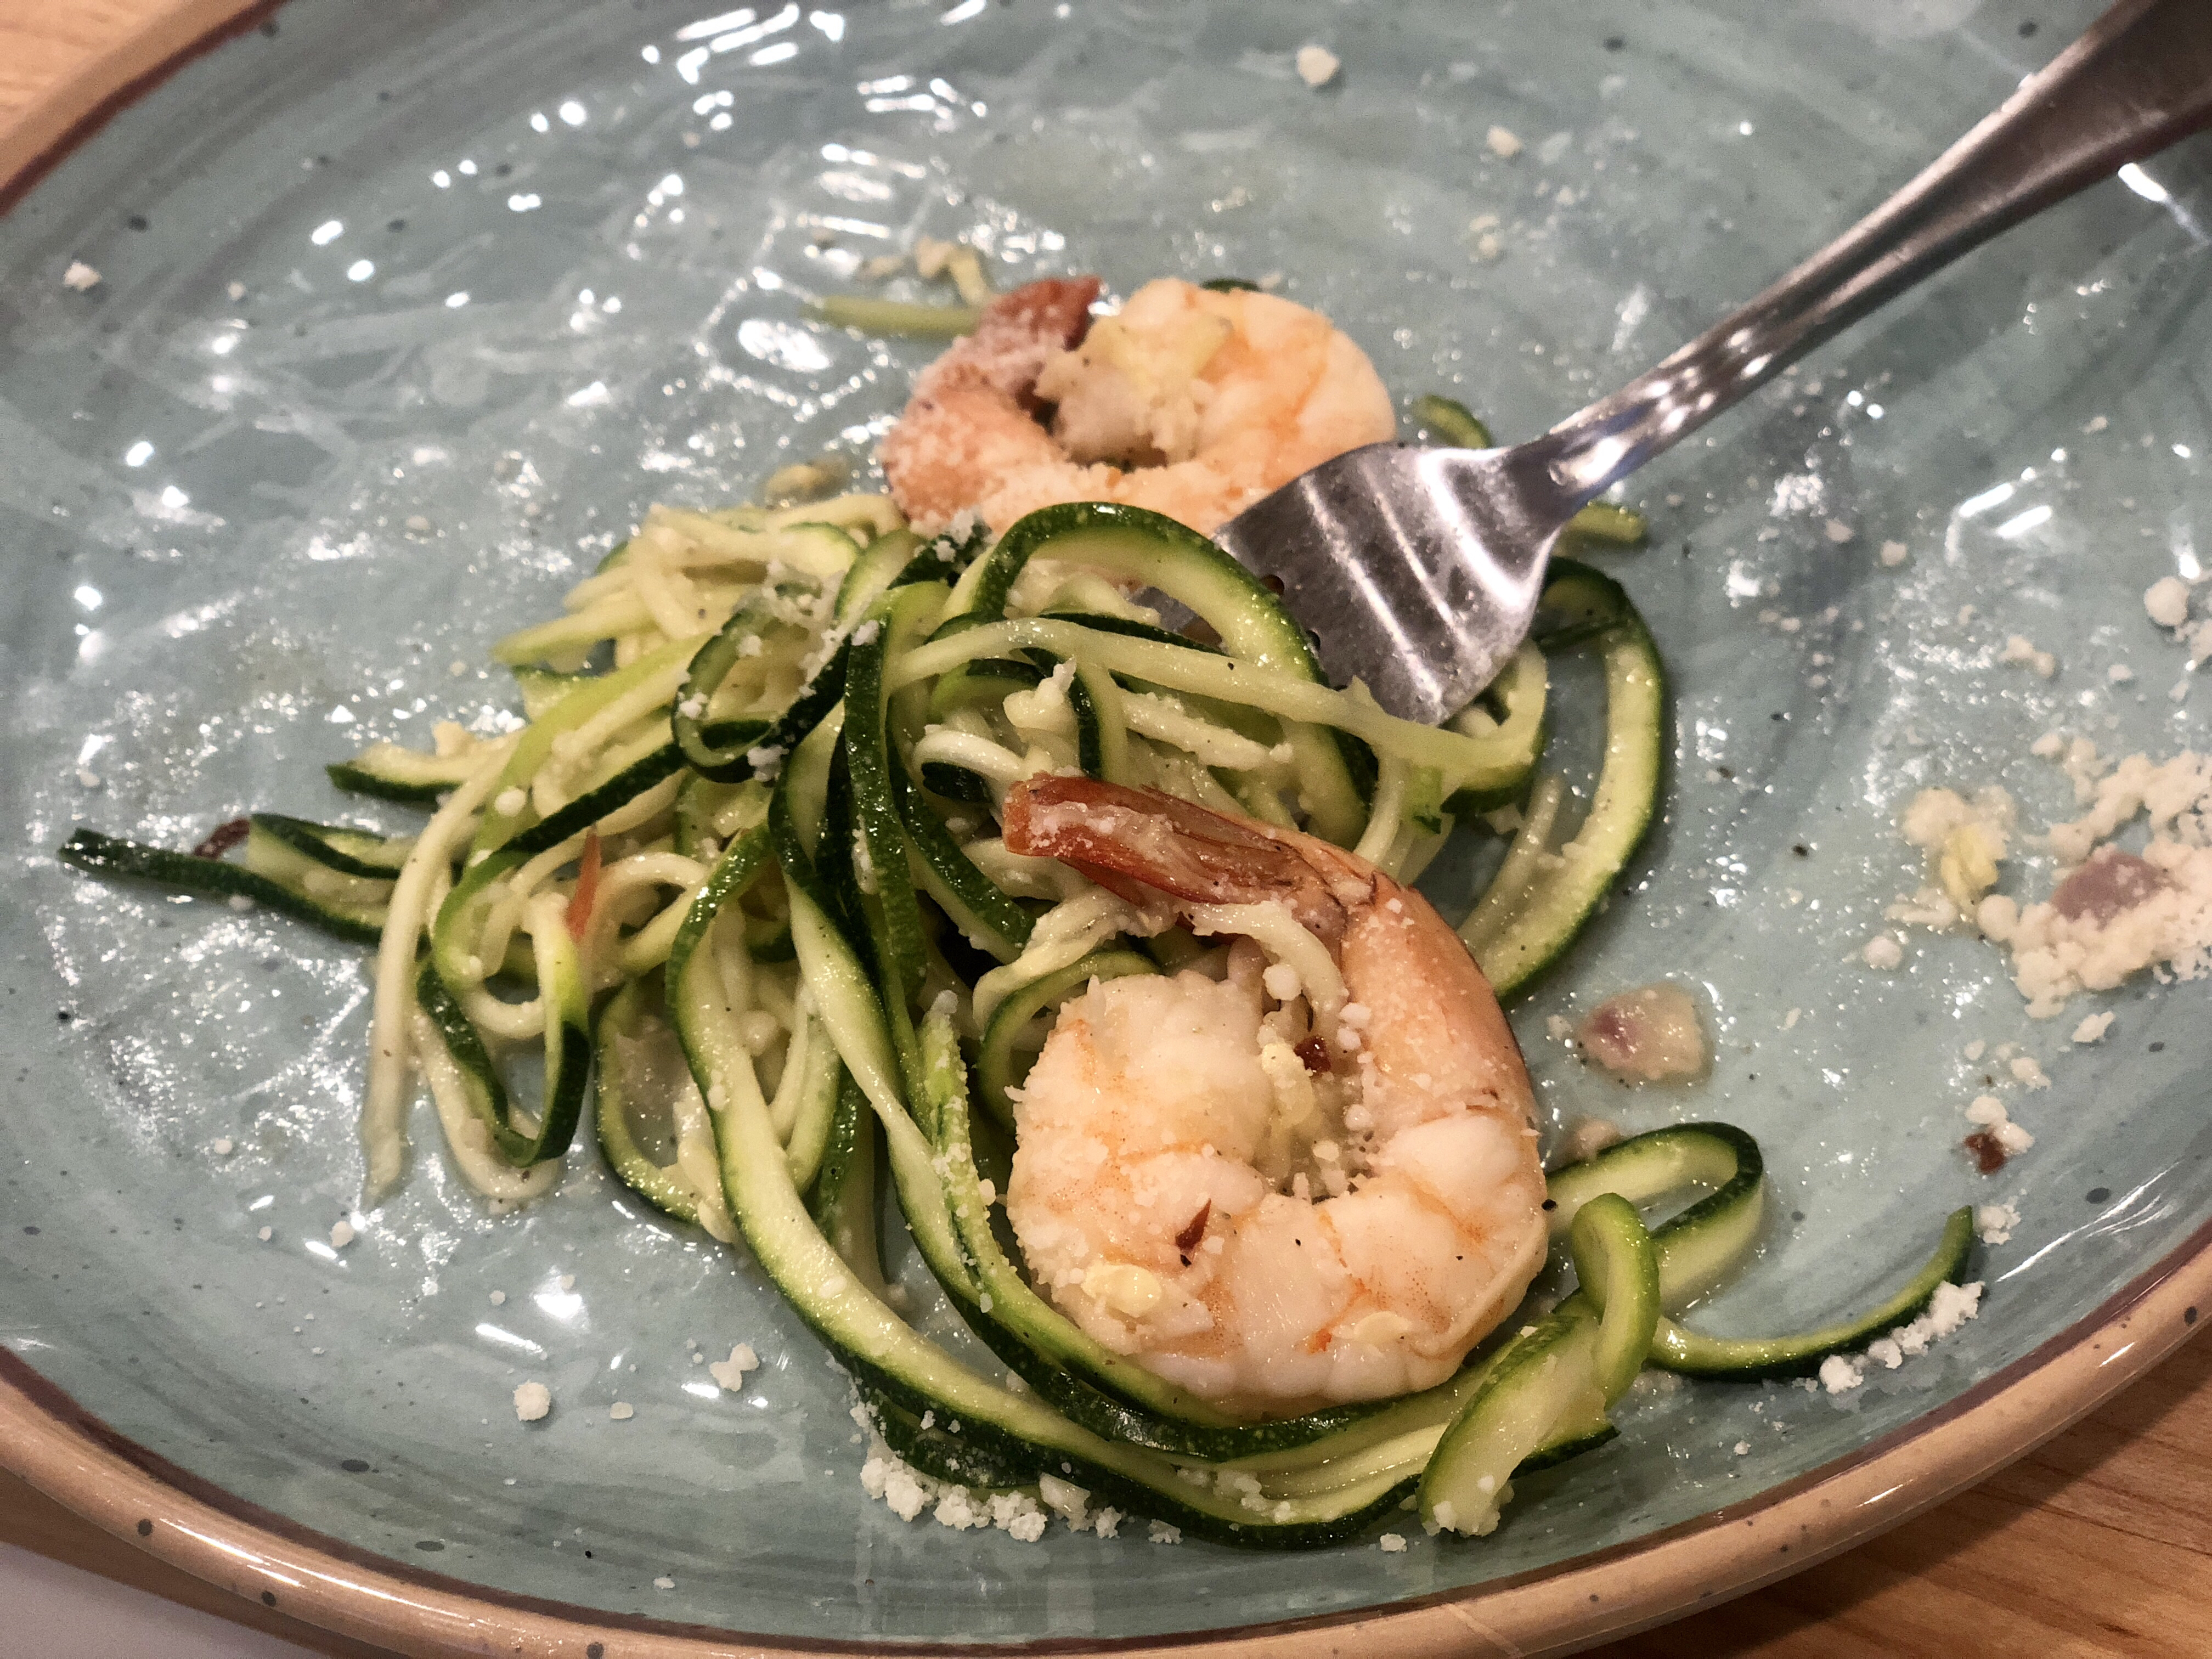 Keto zoodles with Pecorino Romano cheese served with zucchini noodles